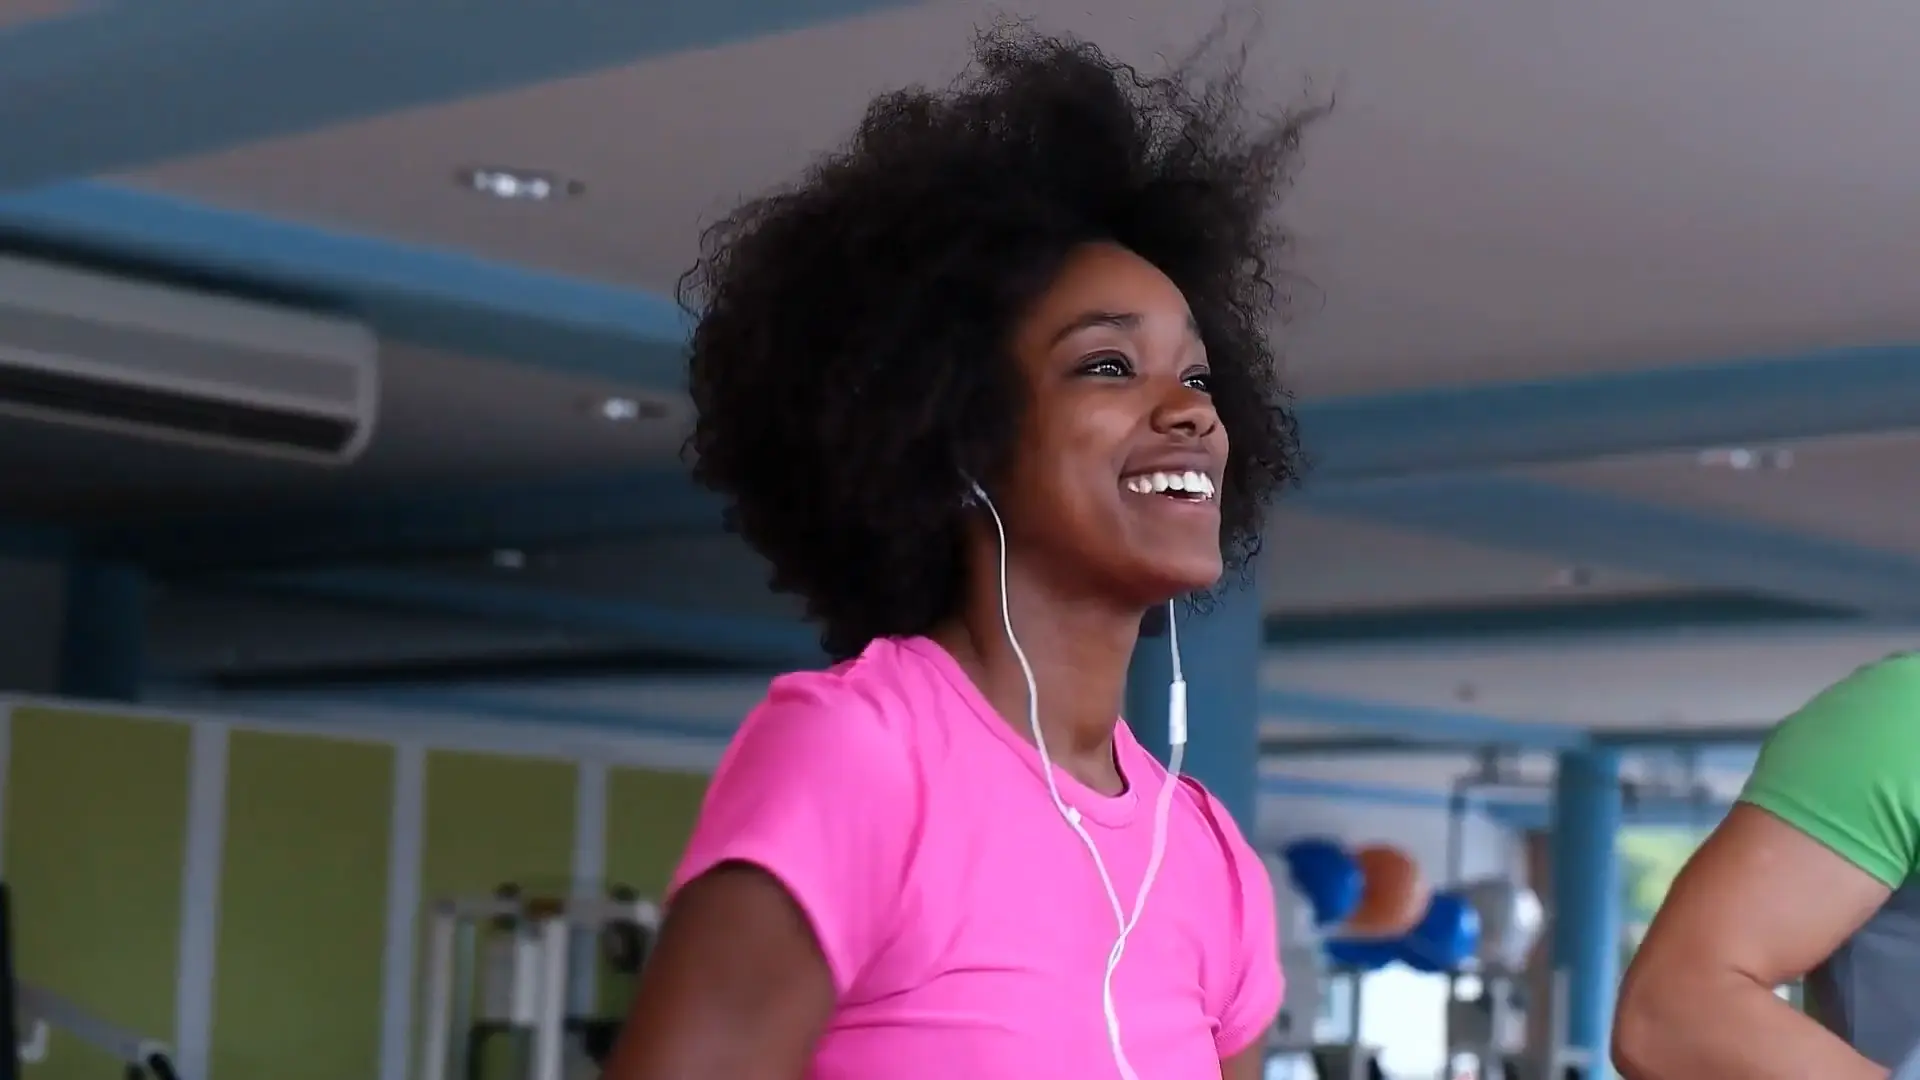 lady running at the gym with headphones in